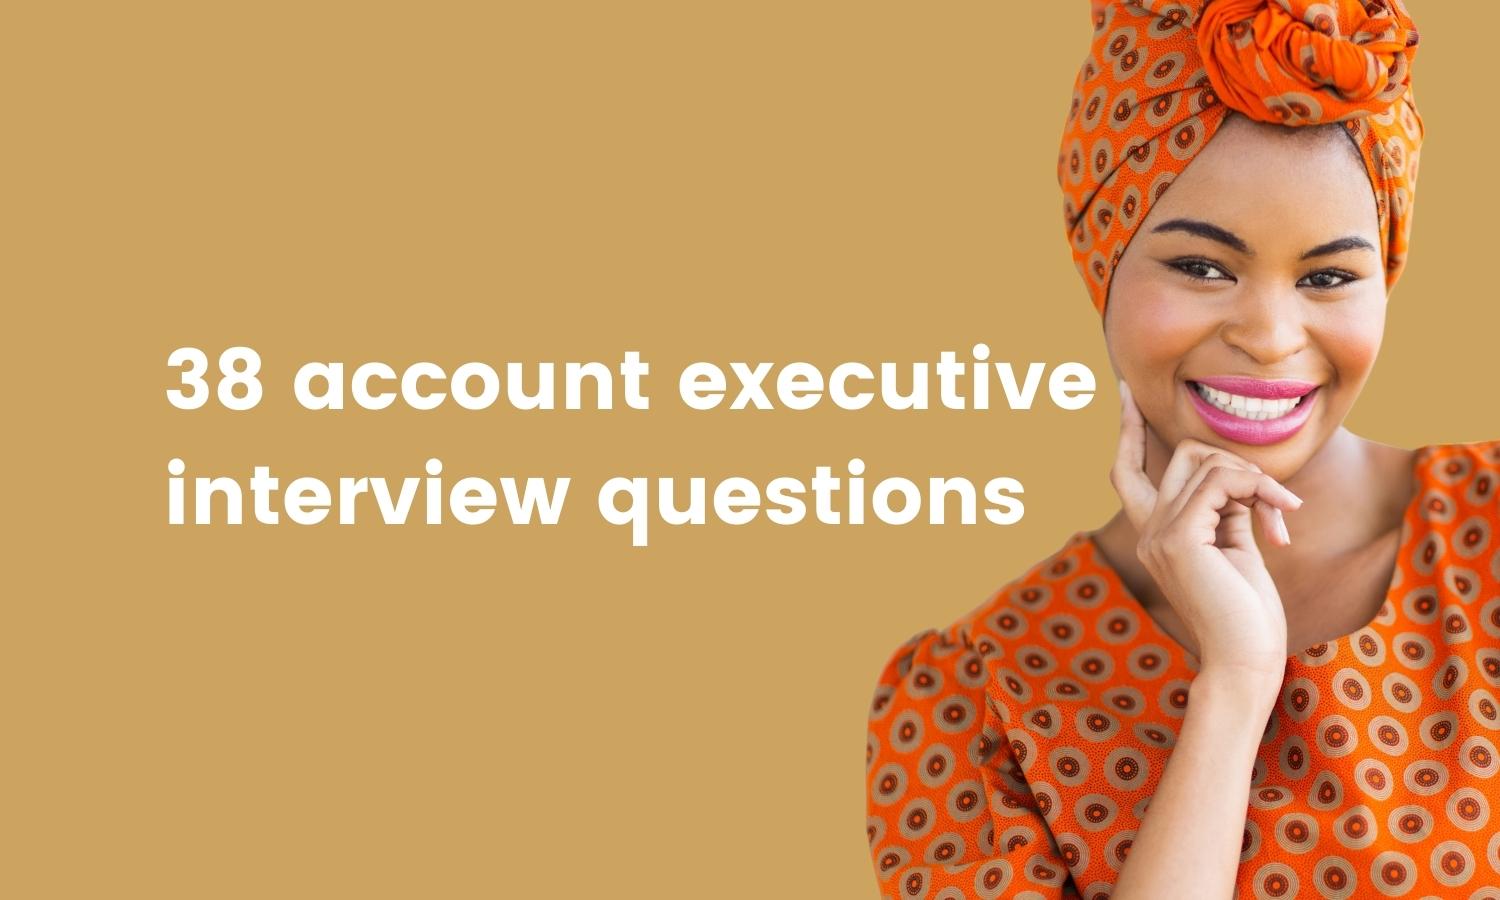 38 account executive interview questions